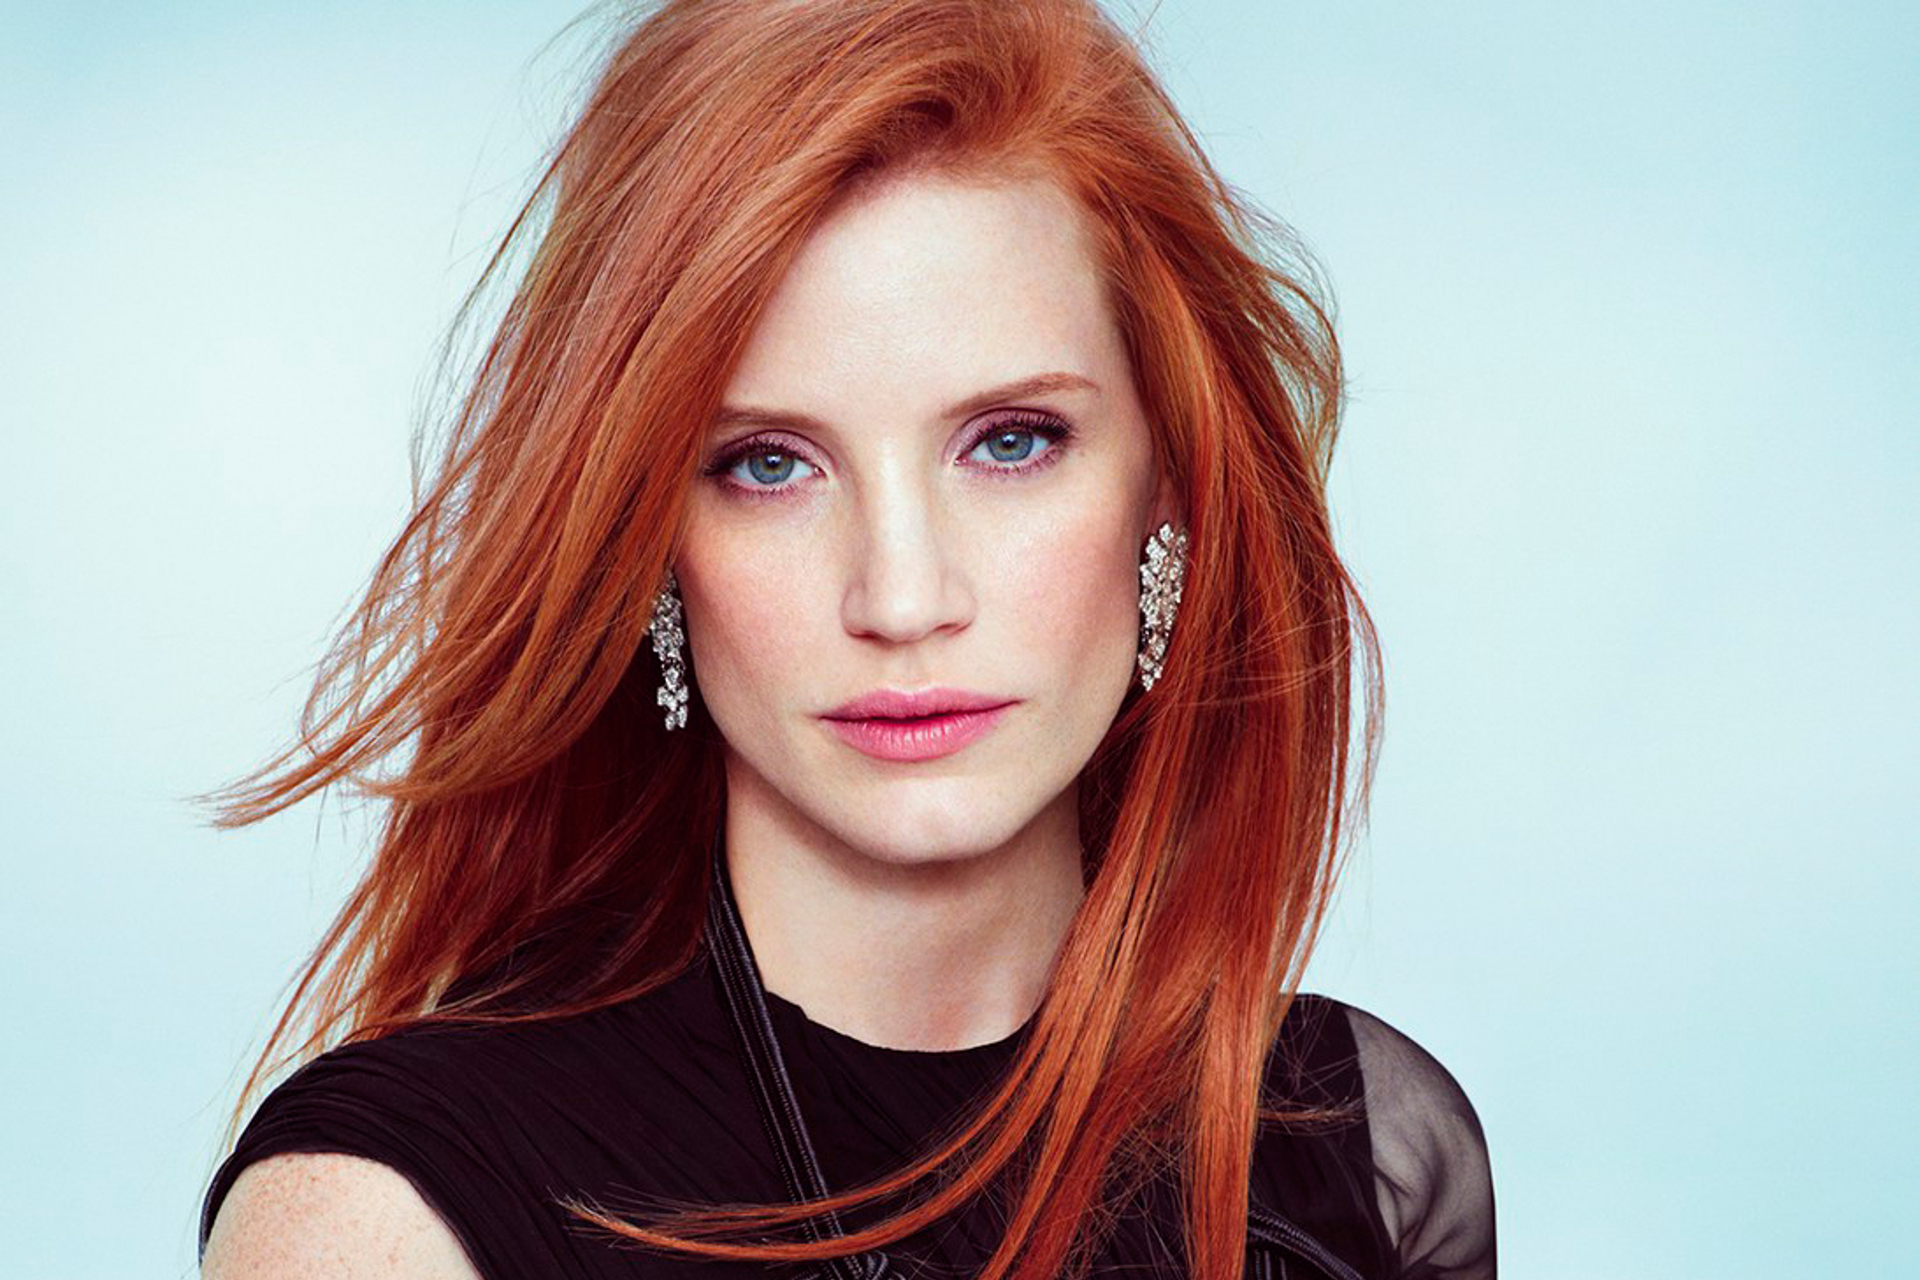 celebrity, jessica chastain, actress, american, blue eyes, earrings, face, redhead